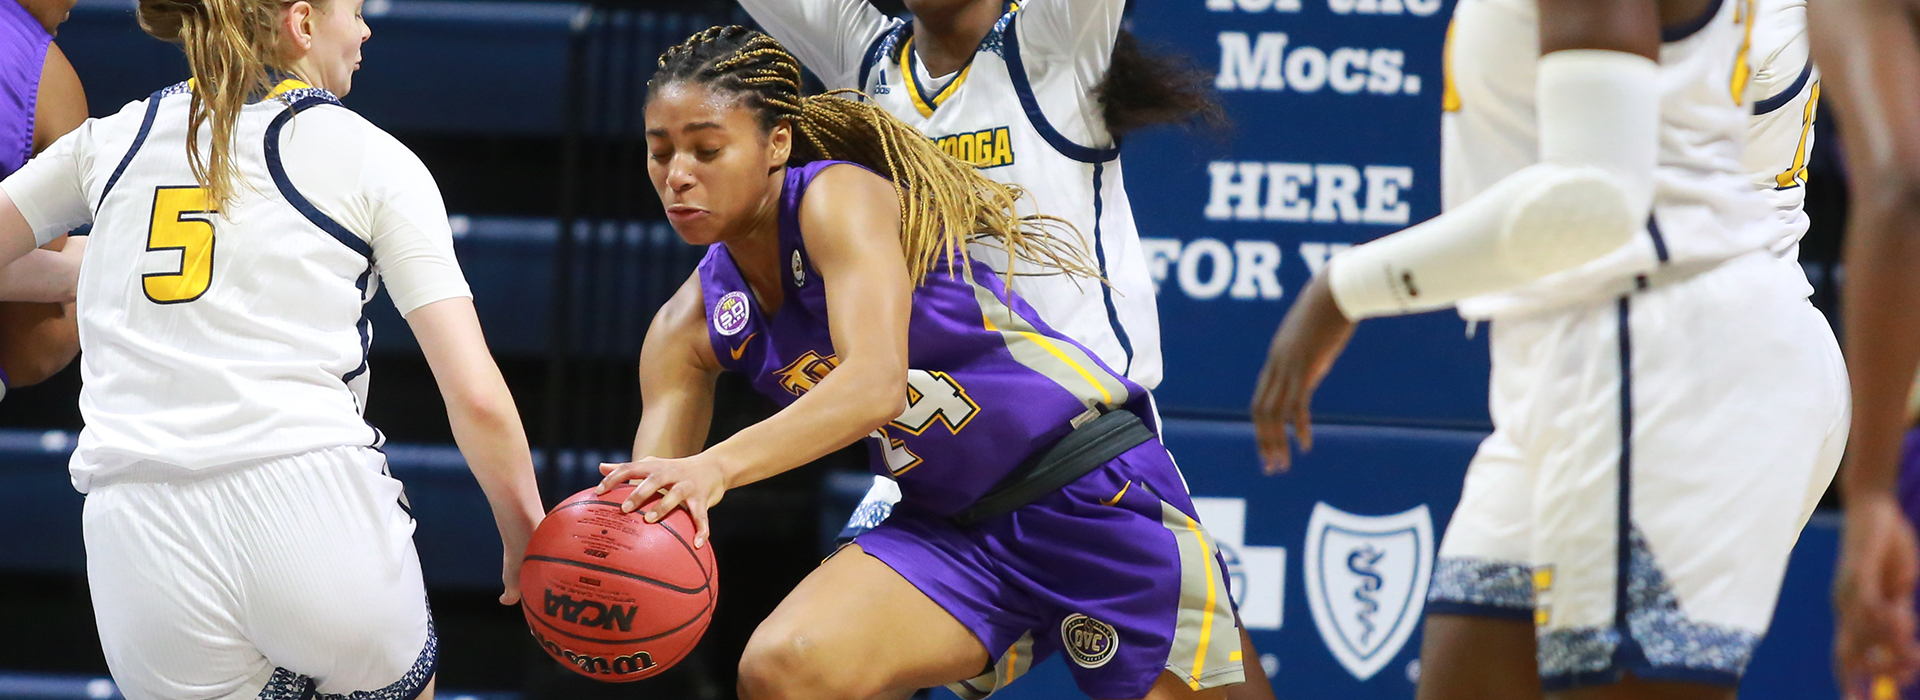 Free throws help propel Golden Eagles to win over Western Carolina